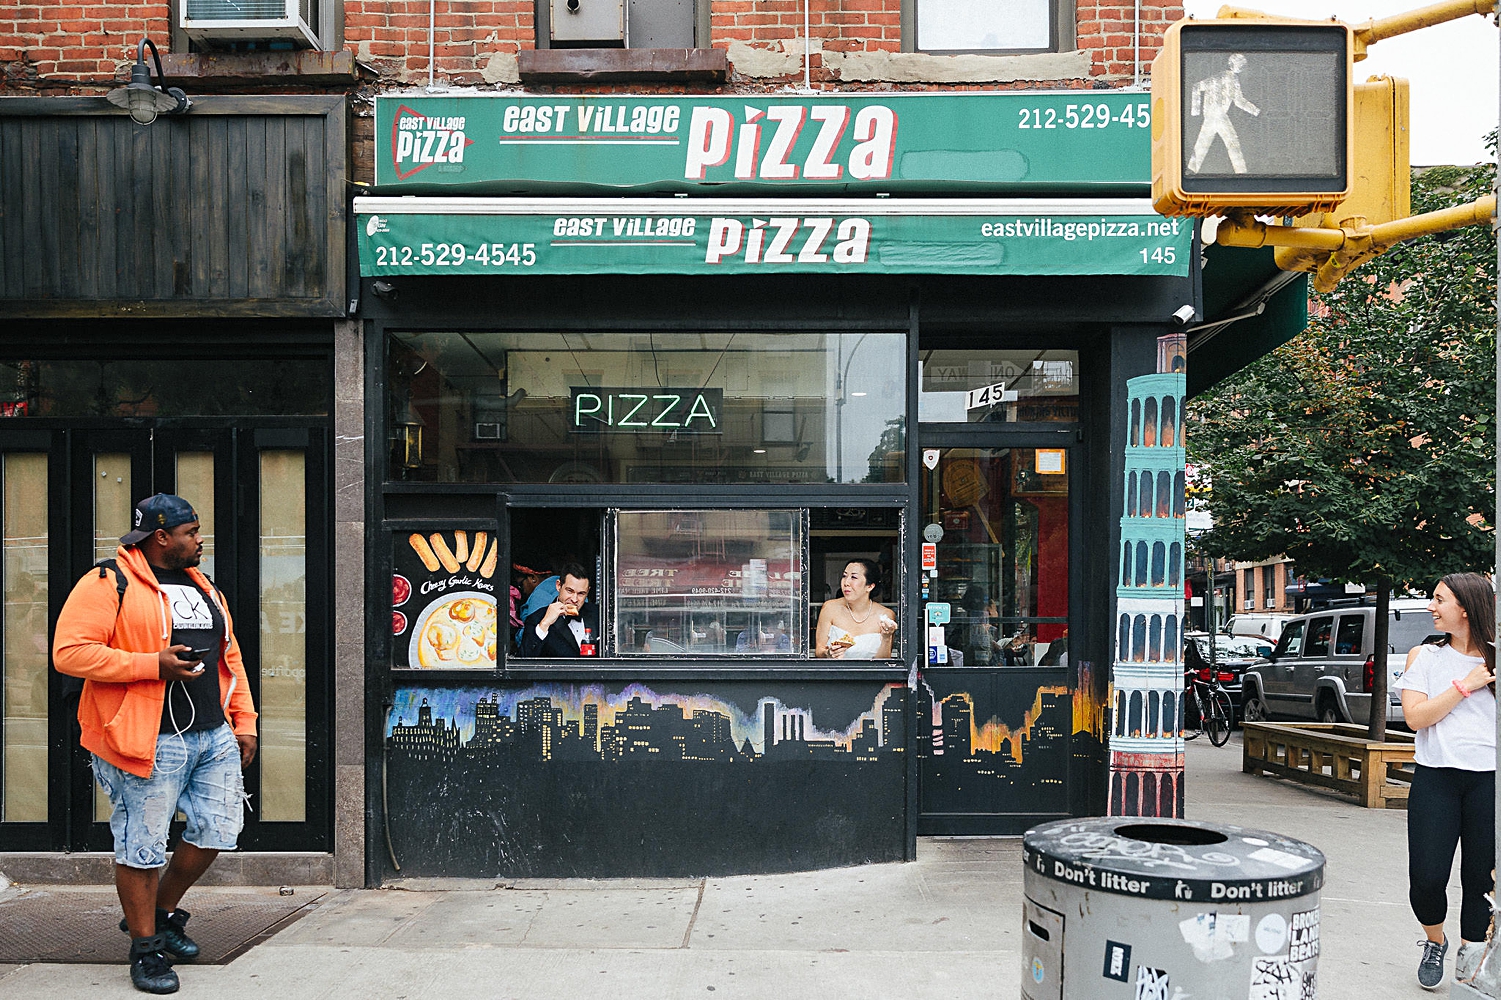 New York City Pizza restaurant sidewalk bride and groom eating out of window